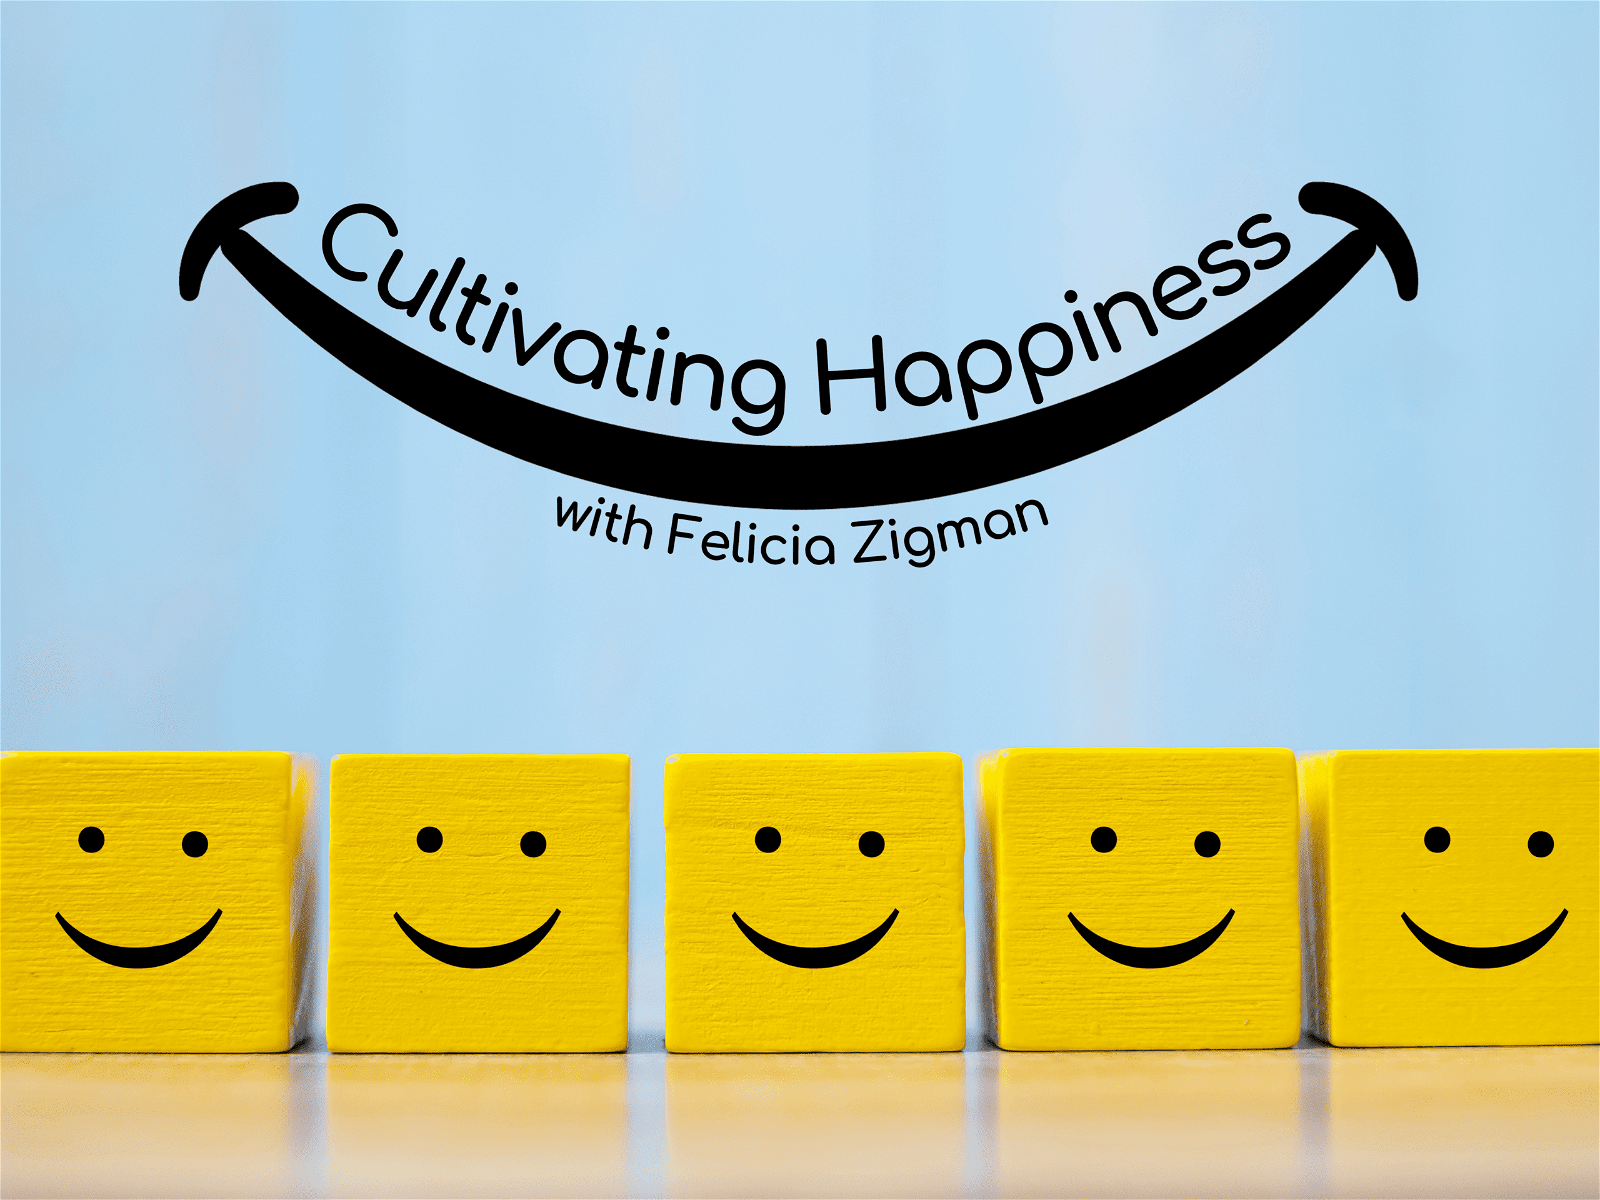 Just Launched: Cultivating Happiness